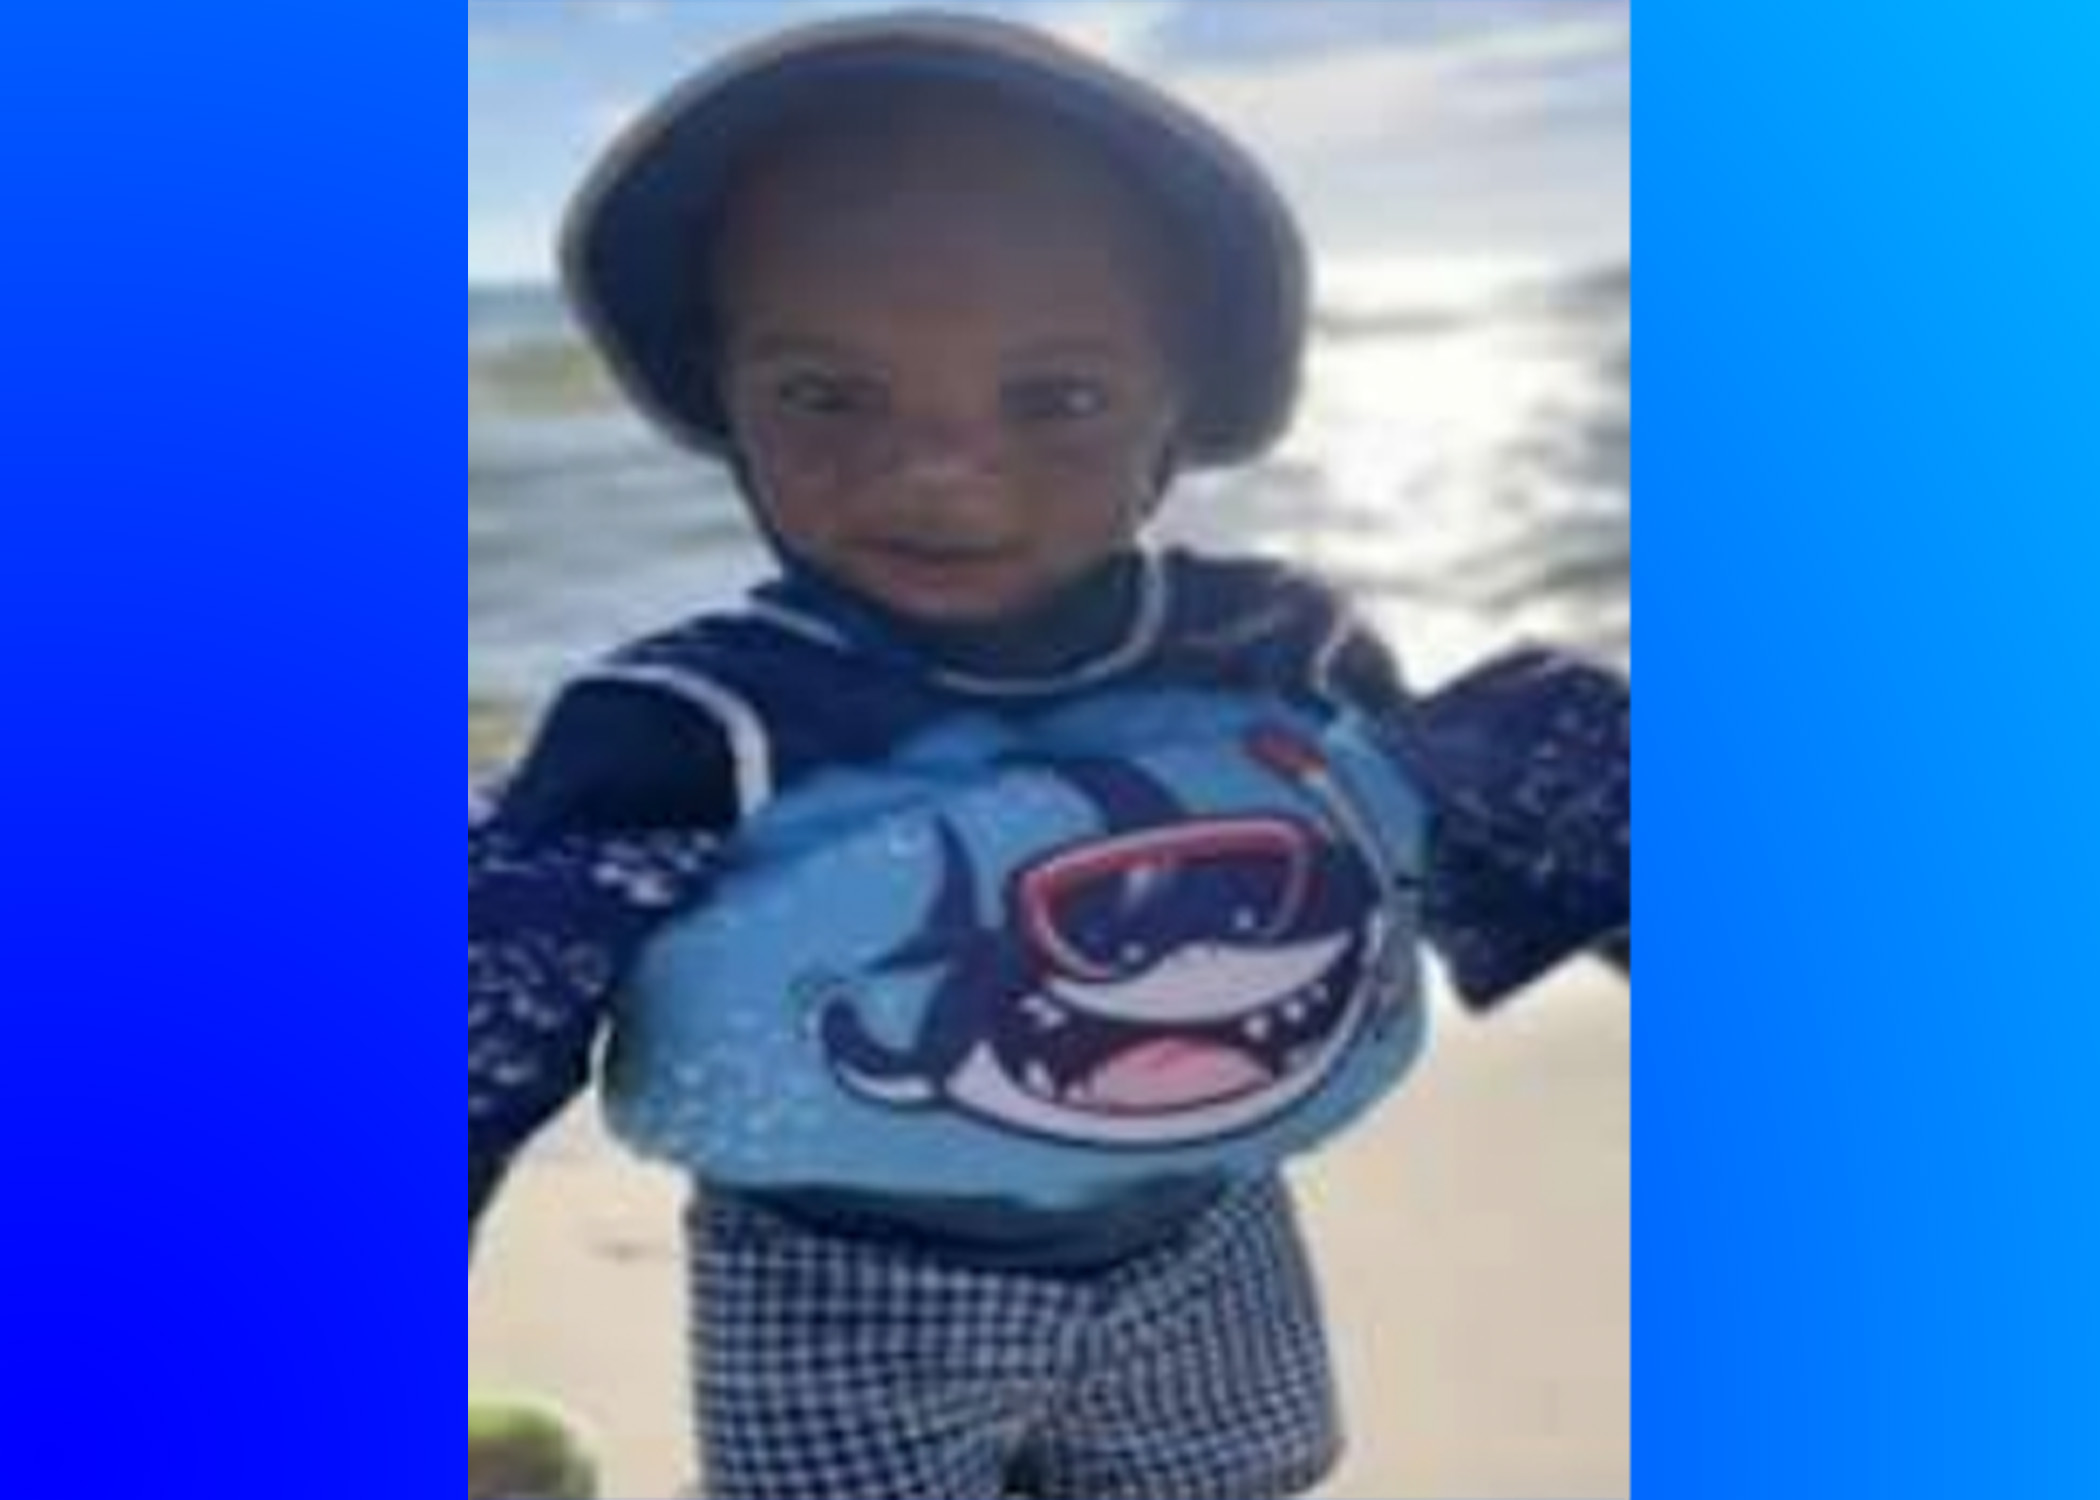 Amber Alert issued for 9-month-old